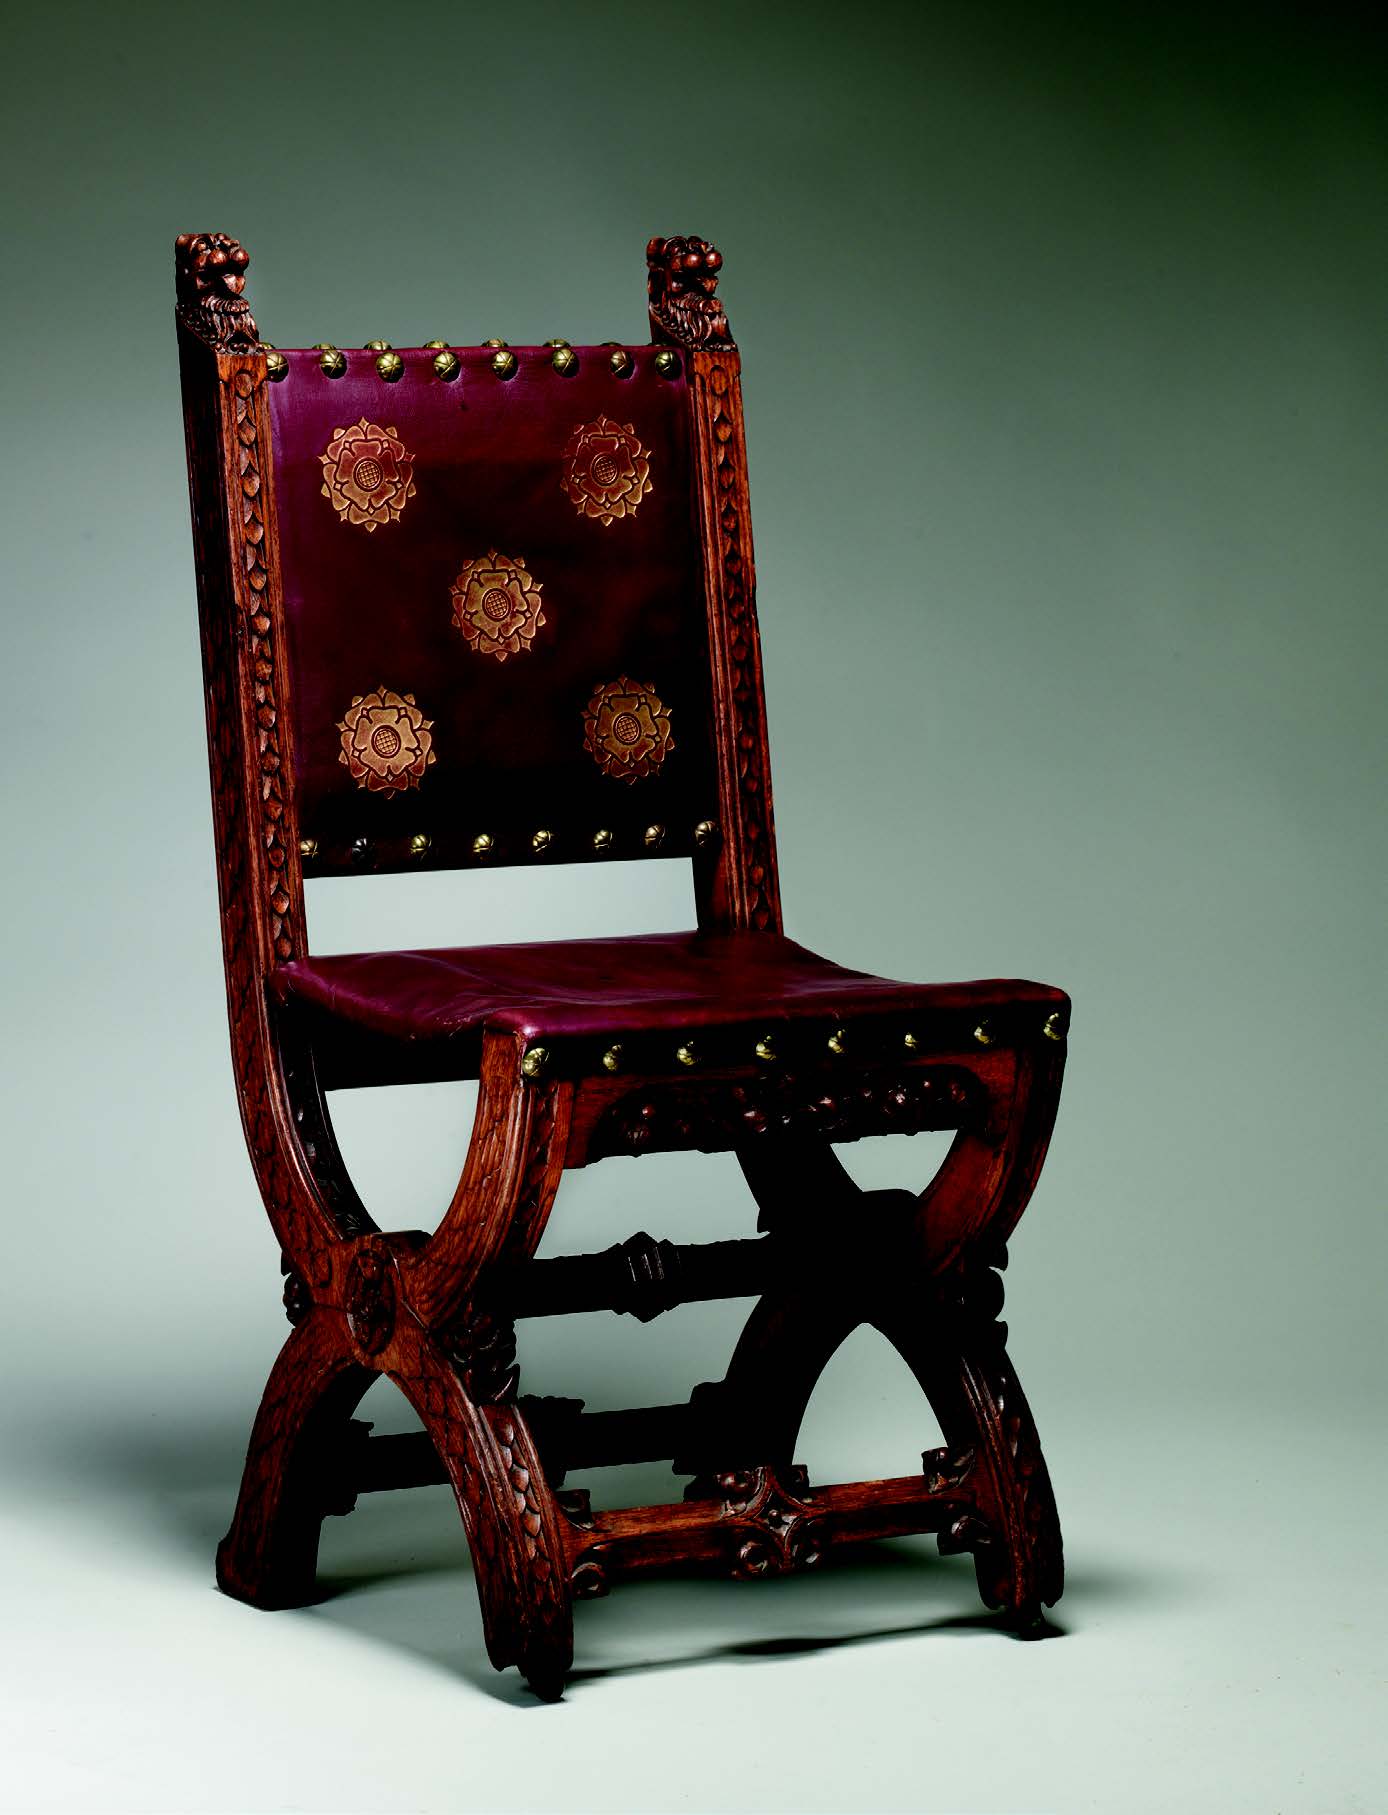 A.W.N. Pugin chair (1812-1852) furnished the Speaker’s House which was completed in 1859